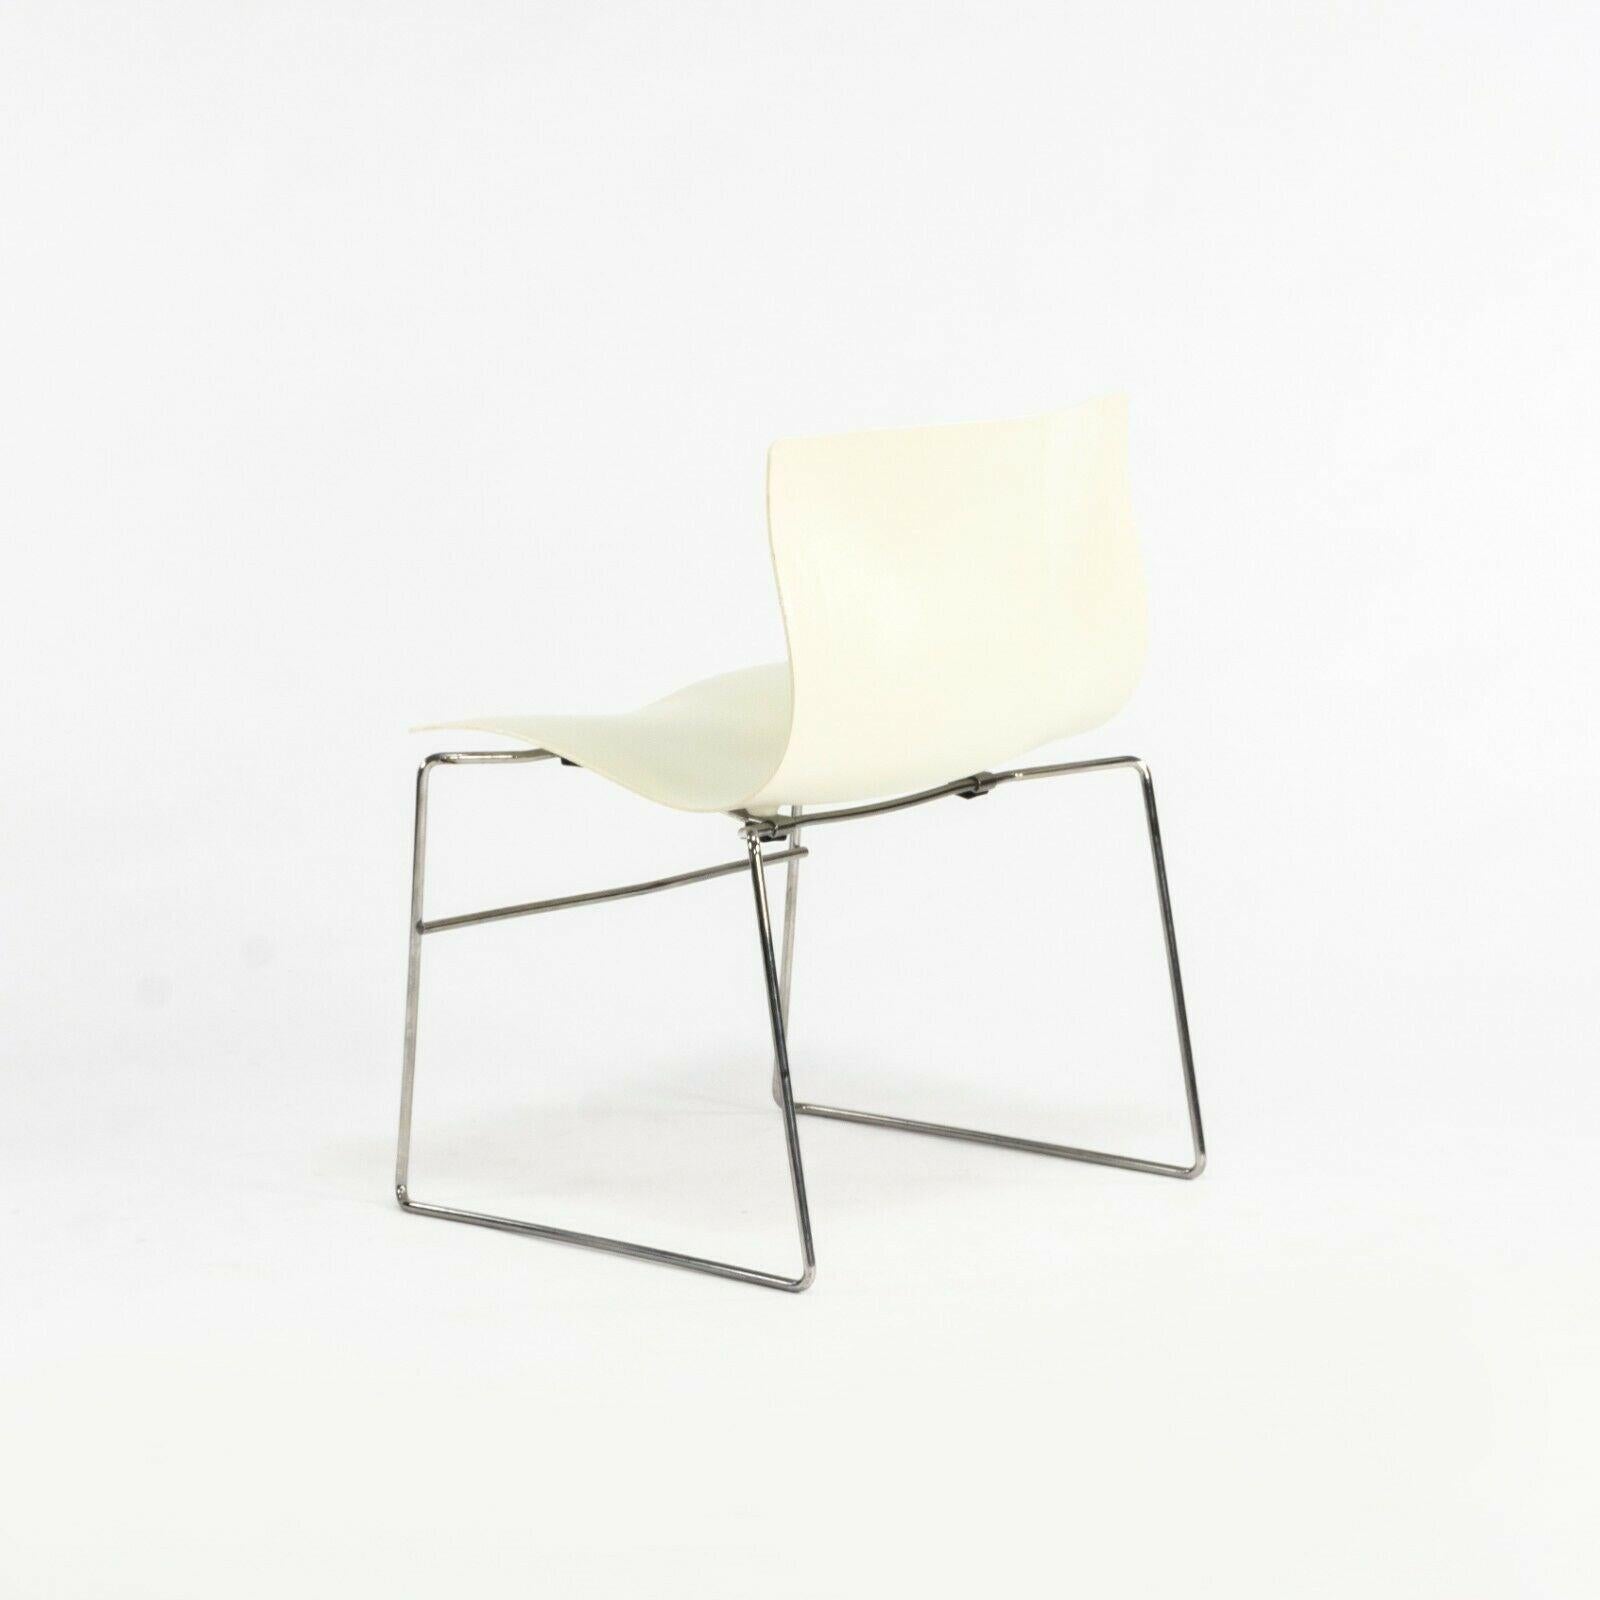 American 1992 Knoll H&kerchief Stacking Chairs by Massimo & Lella Vignelli 10x Available